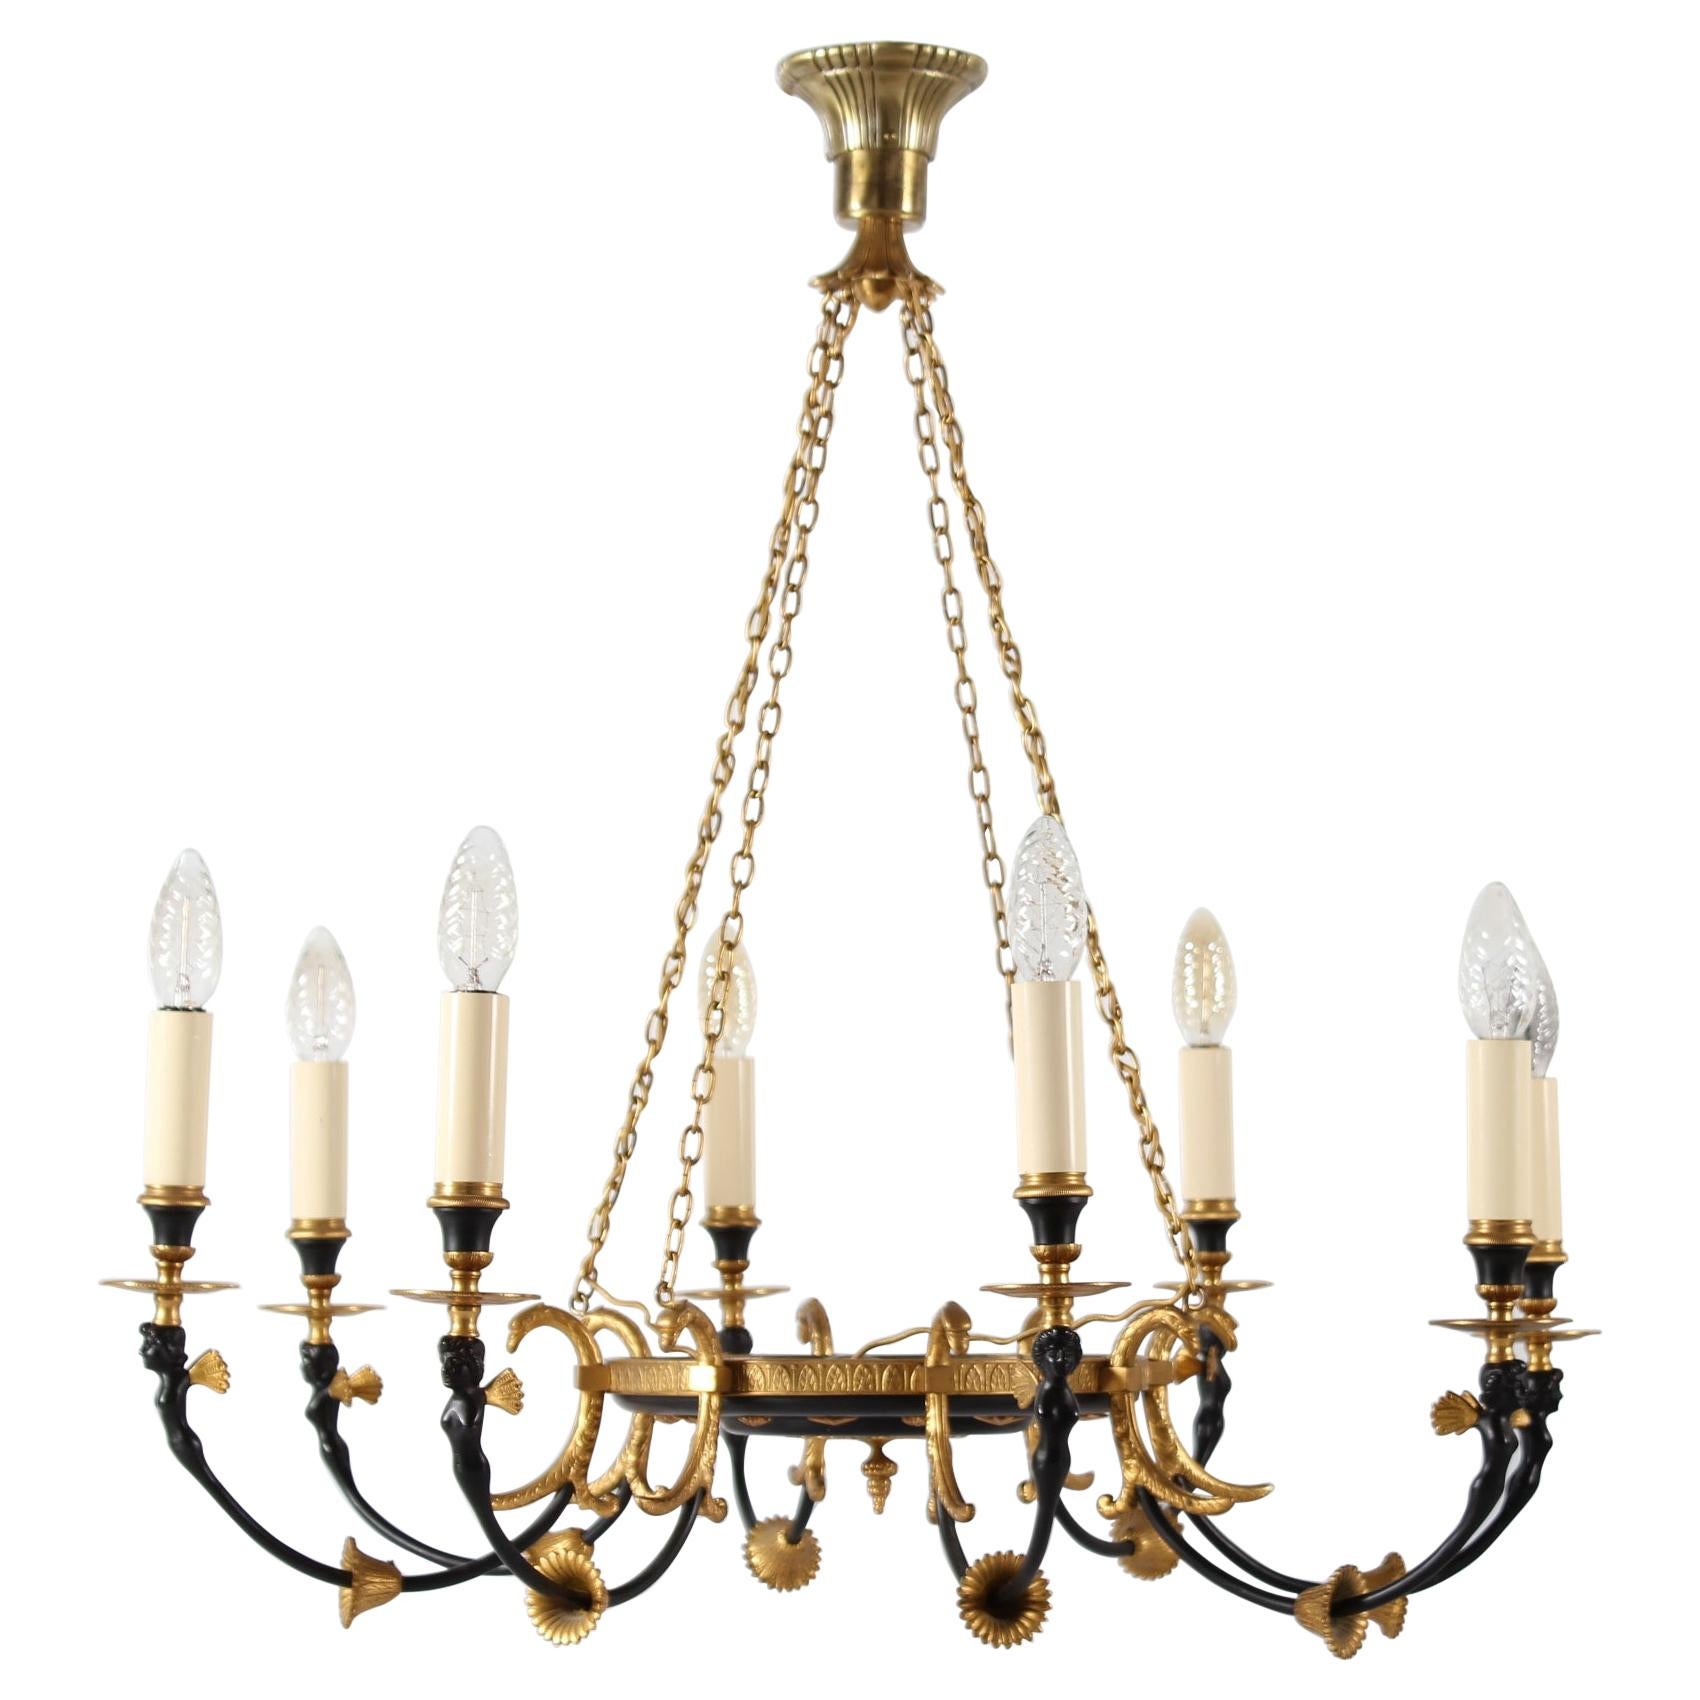 Empire Style Large Chandelier of Gilded and Black Patinated Metal Women Figures